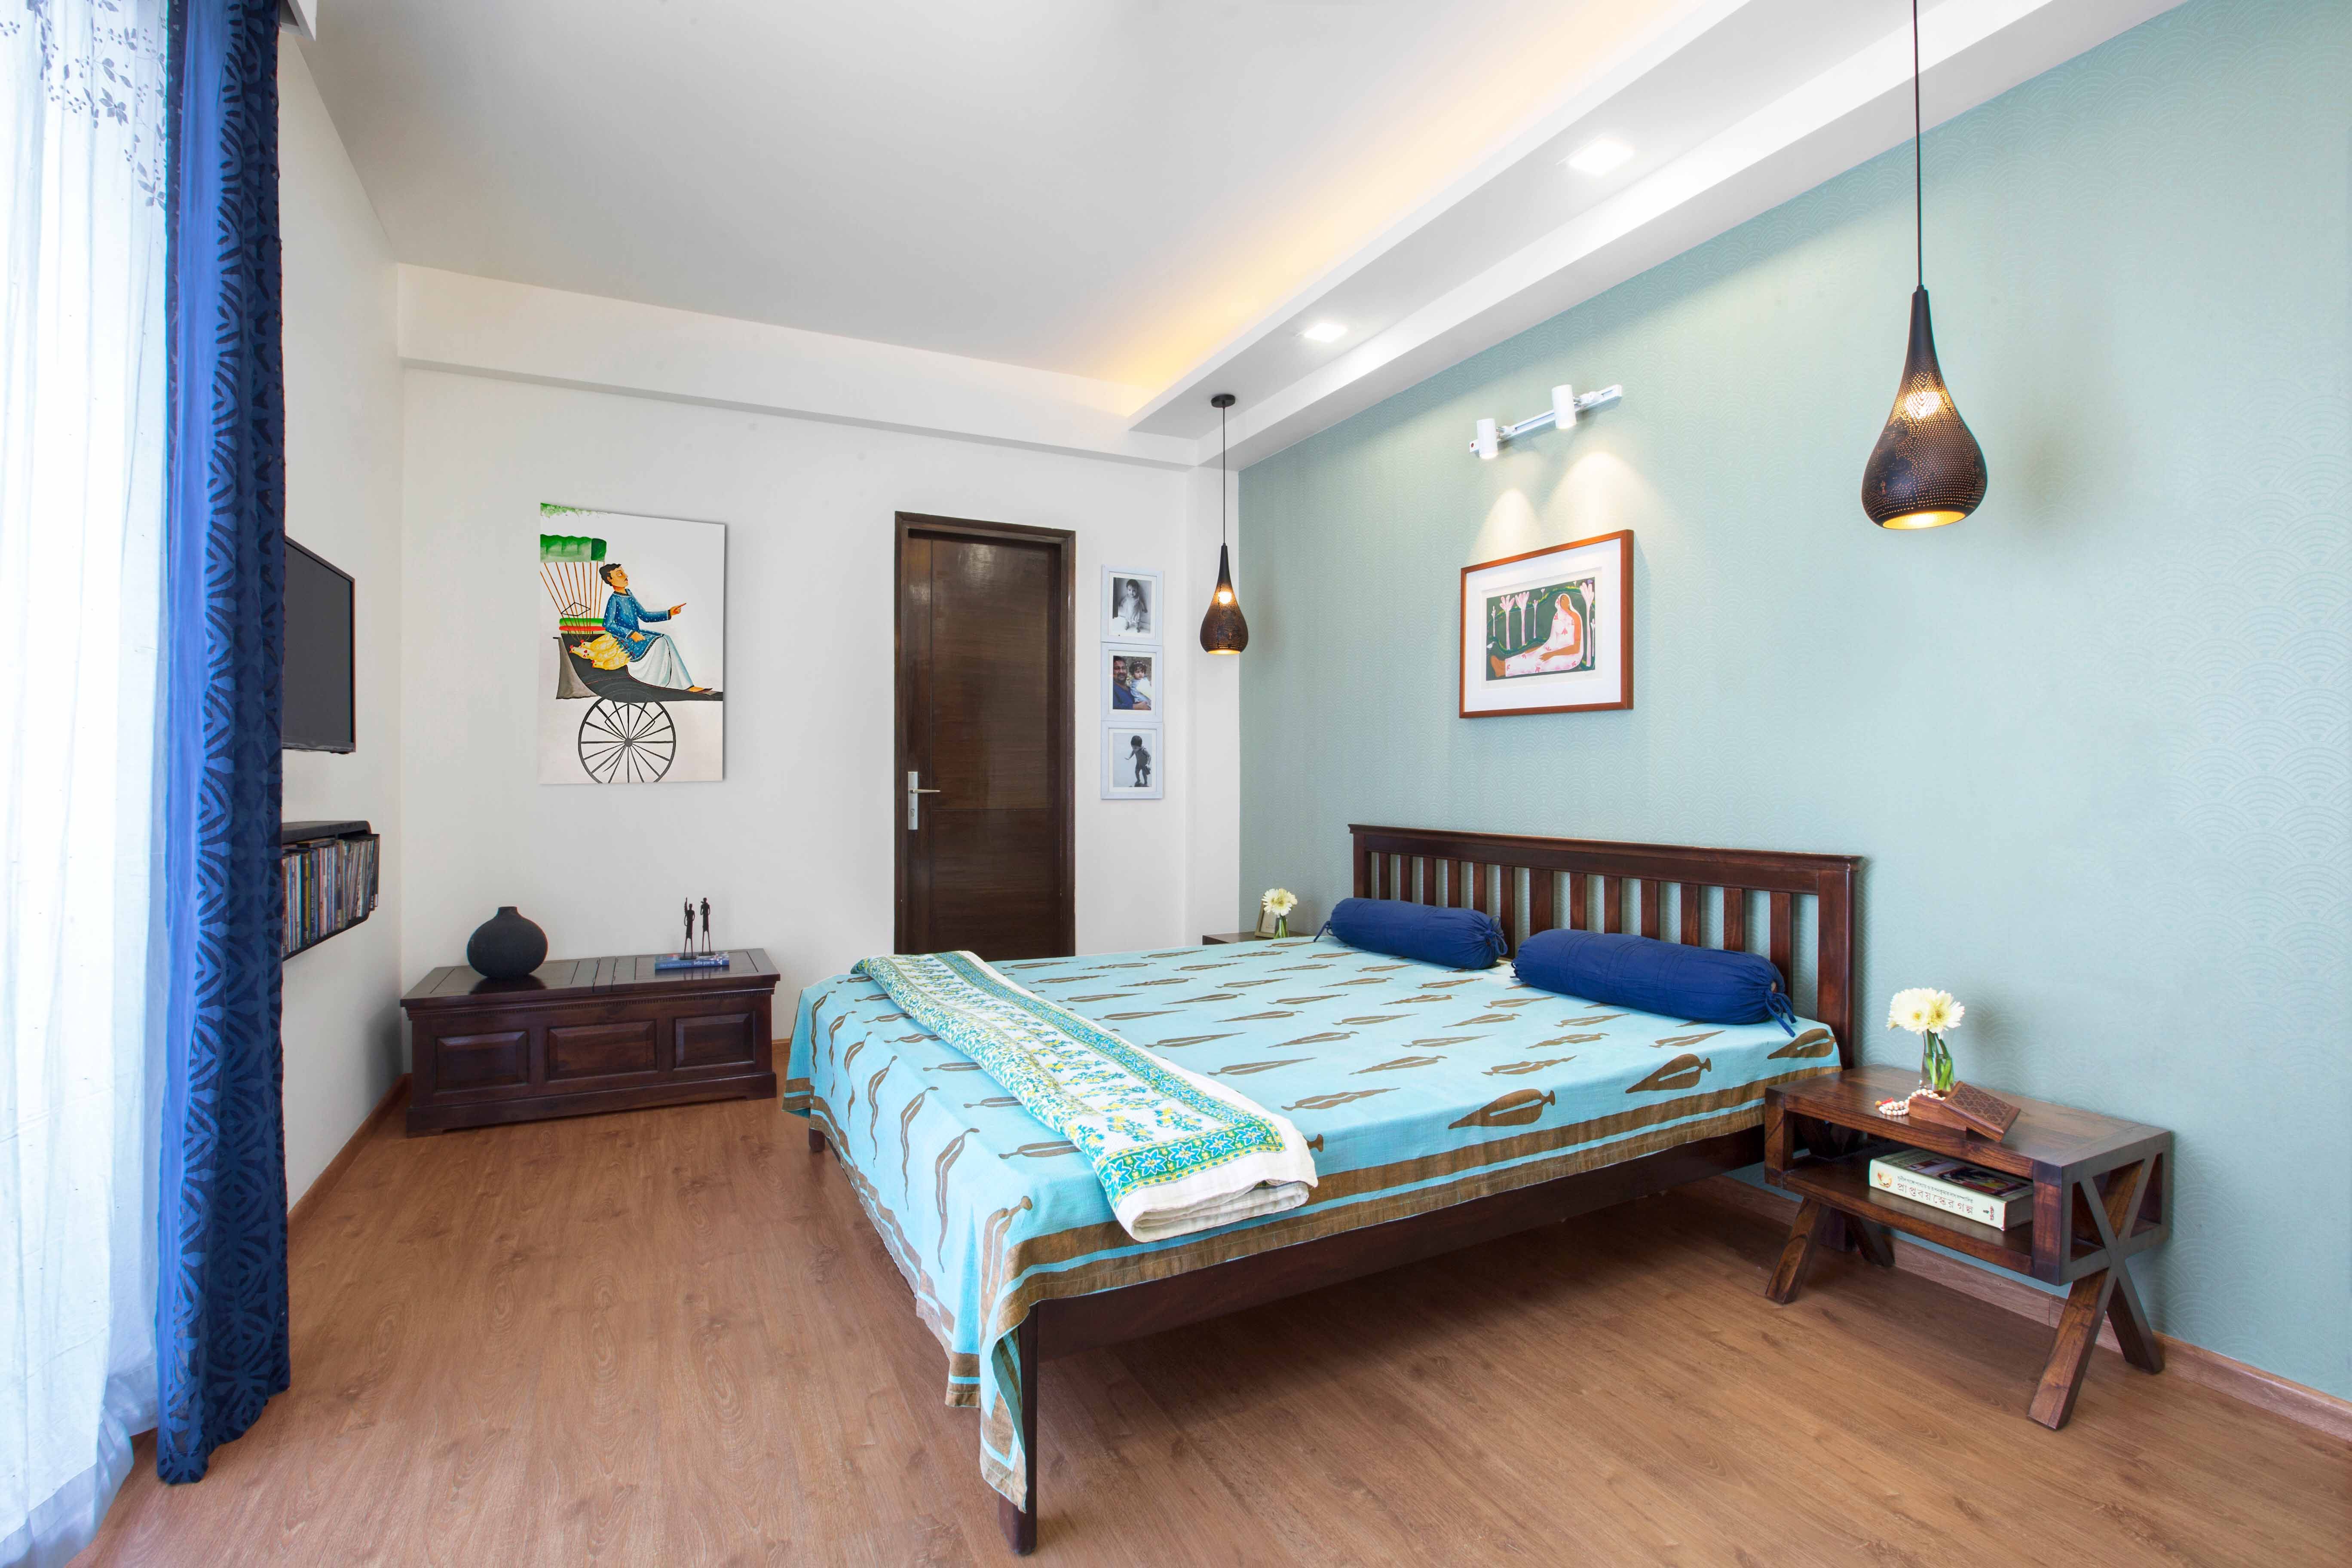 Classic Guest Room Design With Wooden Bed And Light Blue Accent Wall